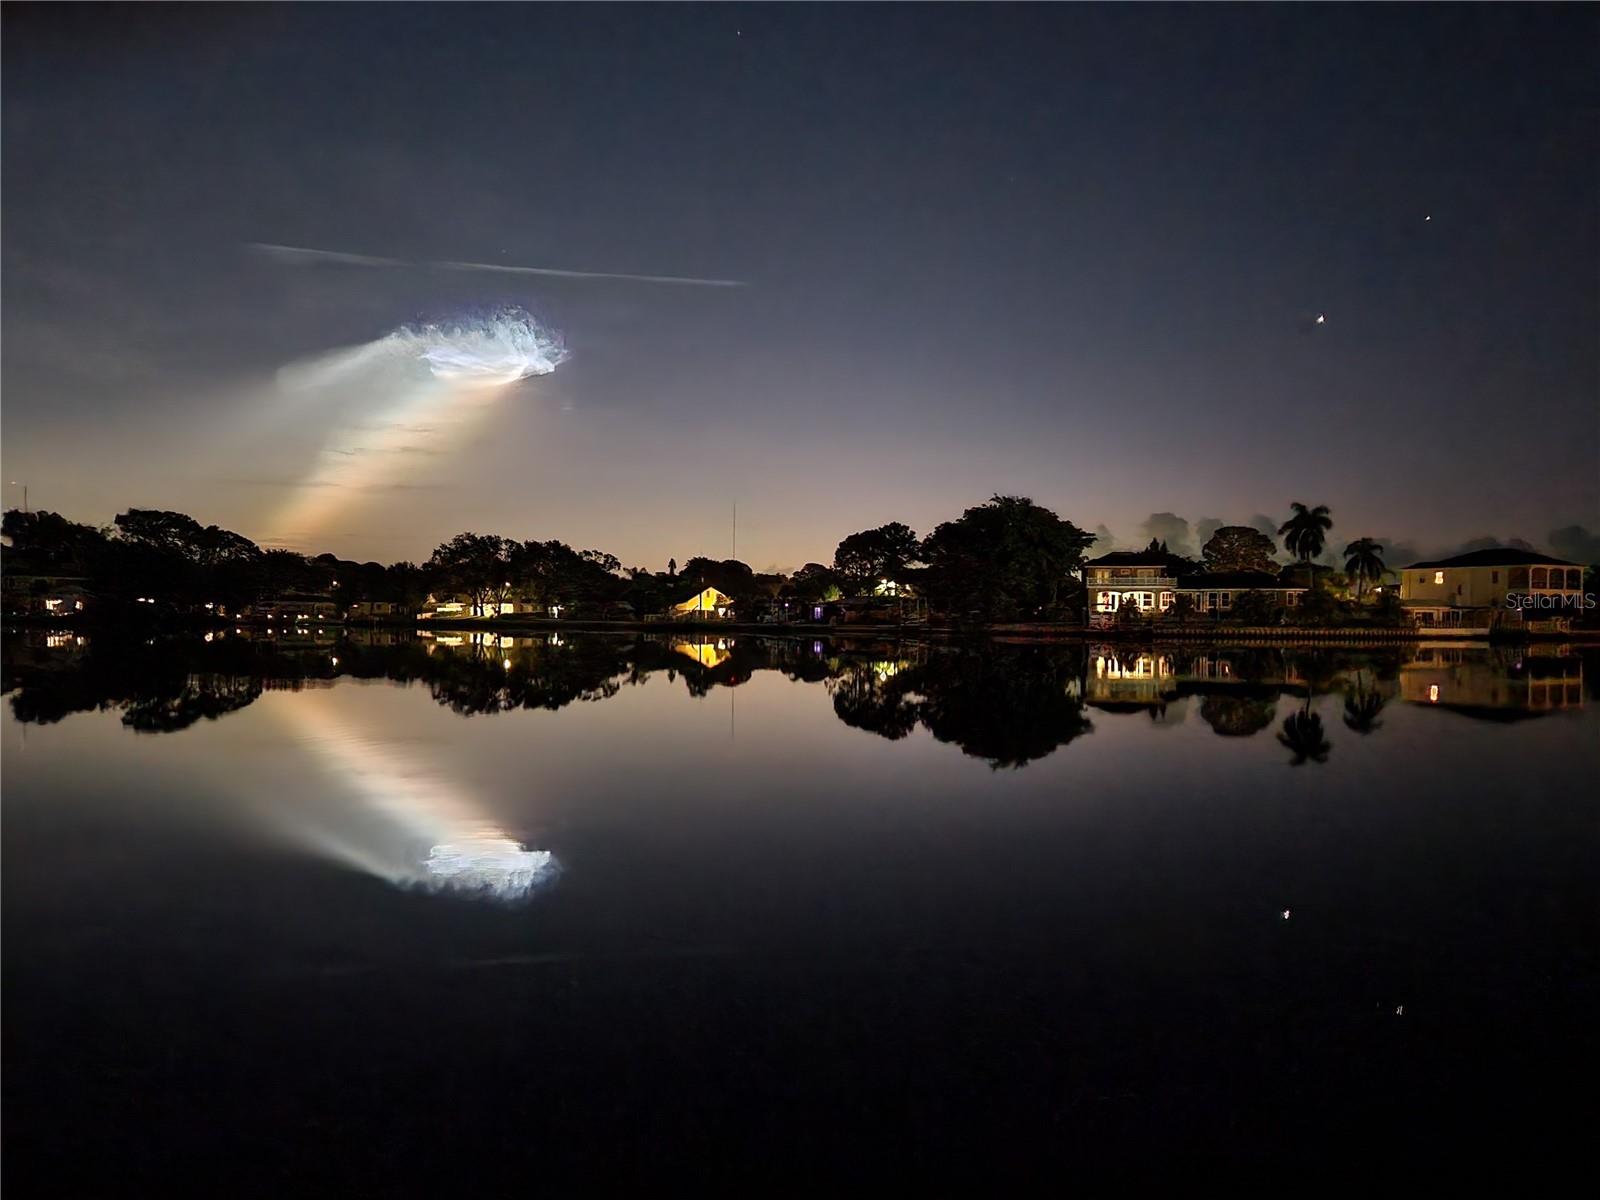 Rocket launch viewed from the dock